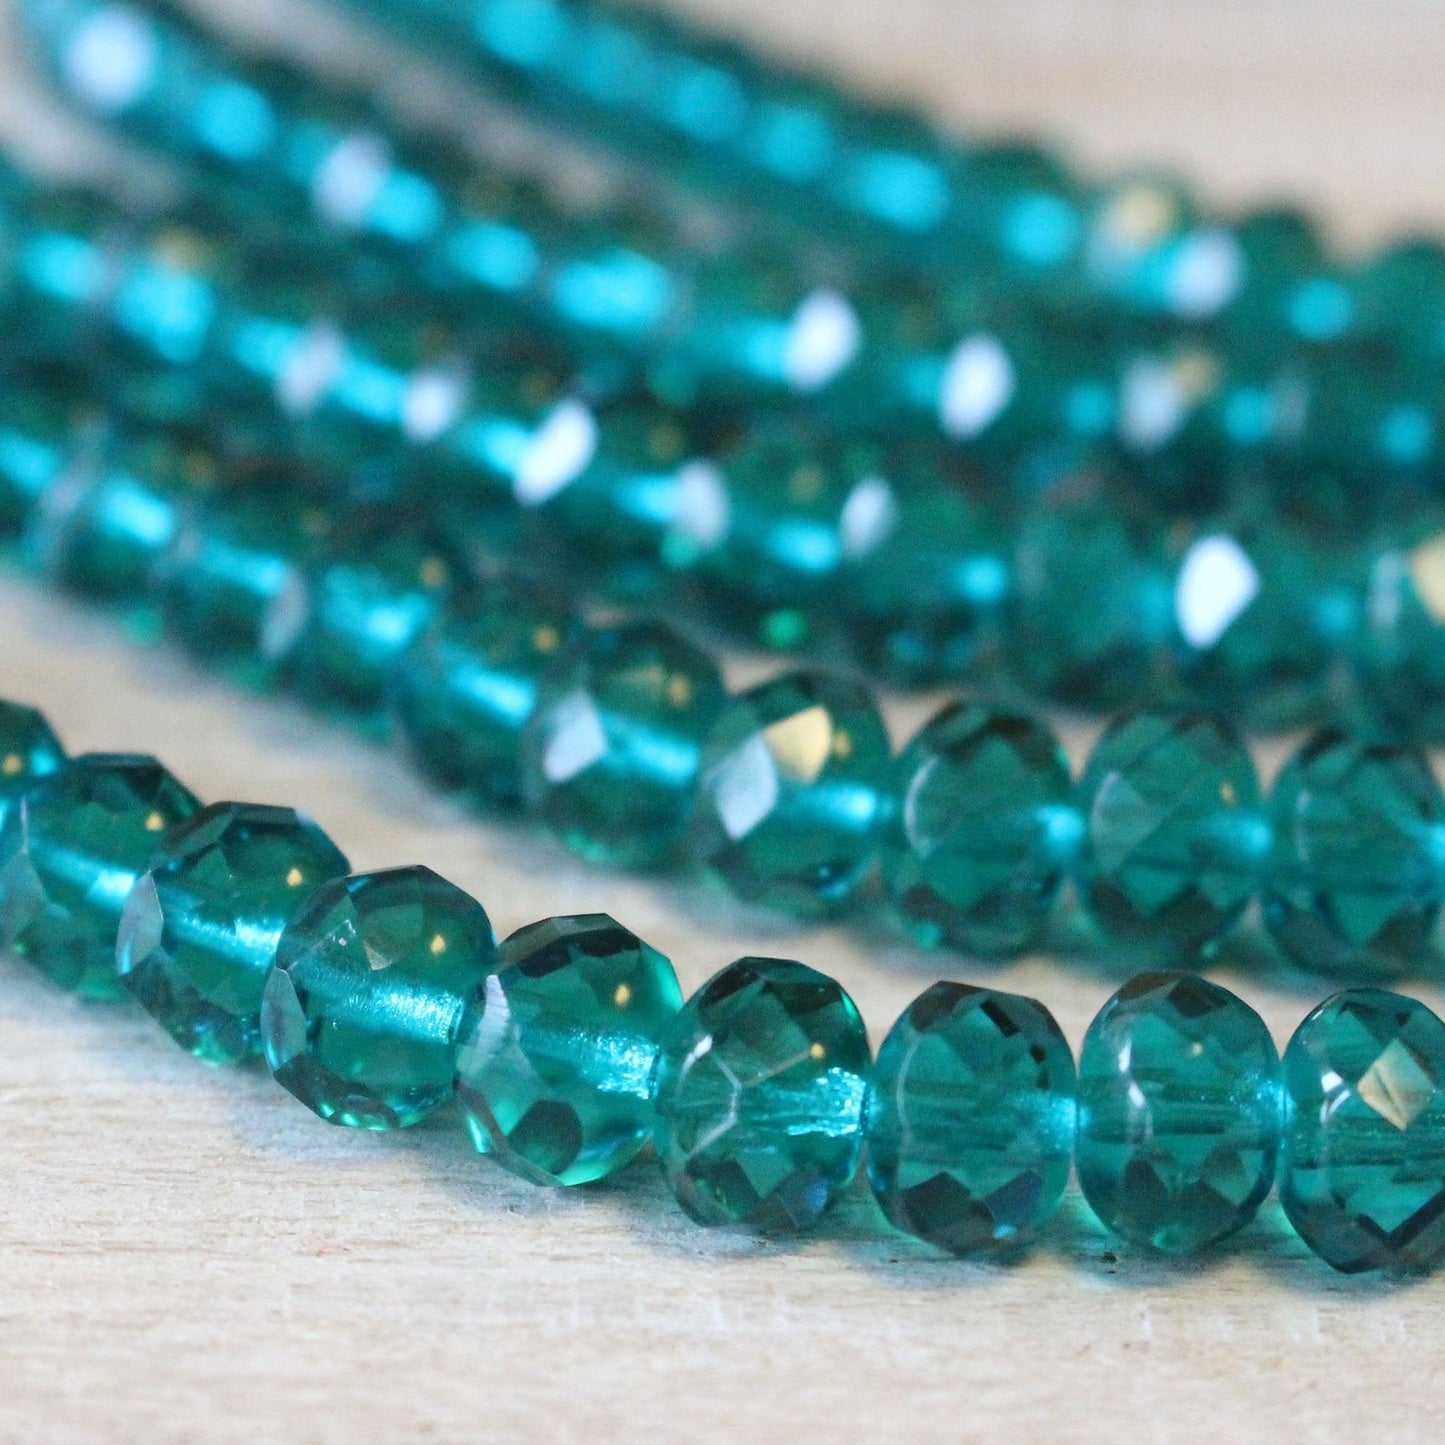 6x9mm Rondelle Beads - Transparent Teal - 20 Beads